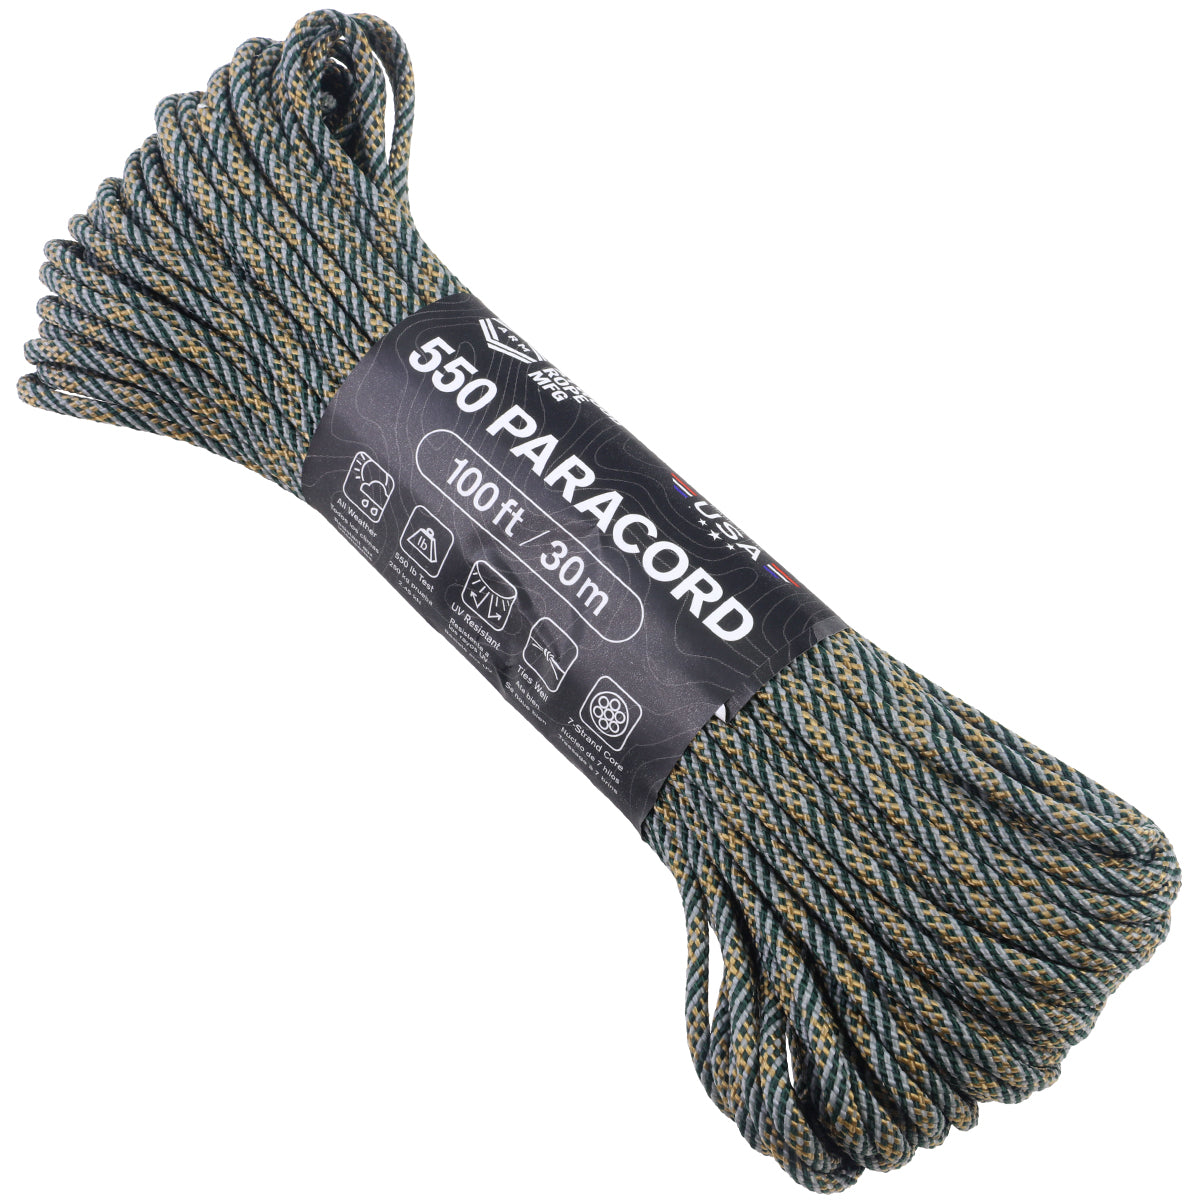 550 Paracord - Honor – Atwood Rope MFG